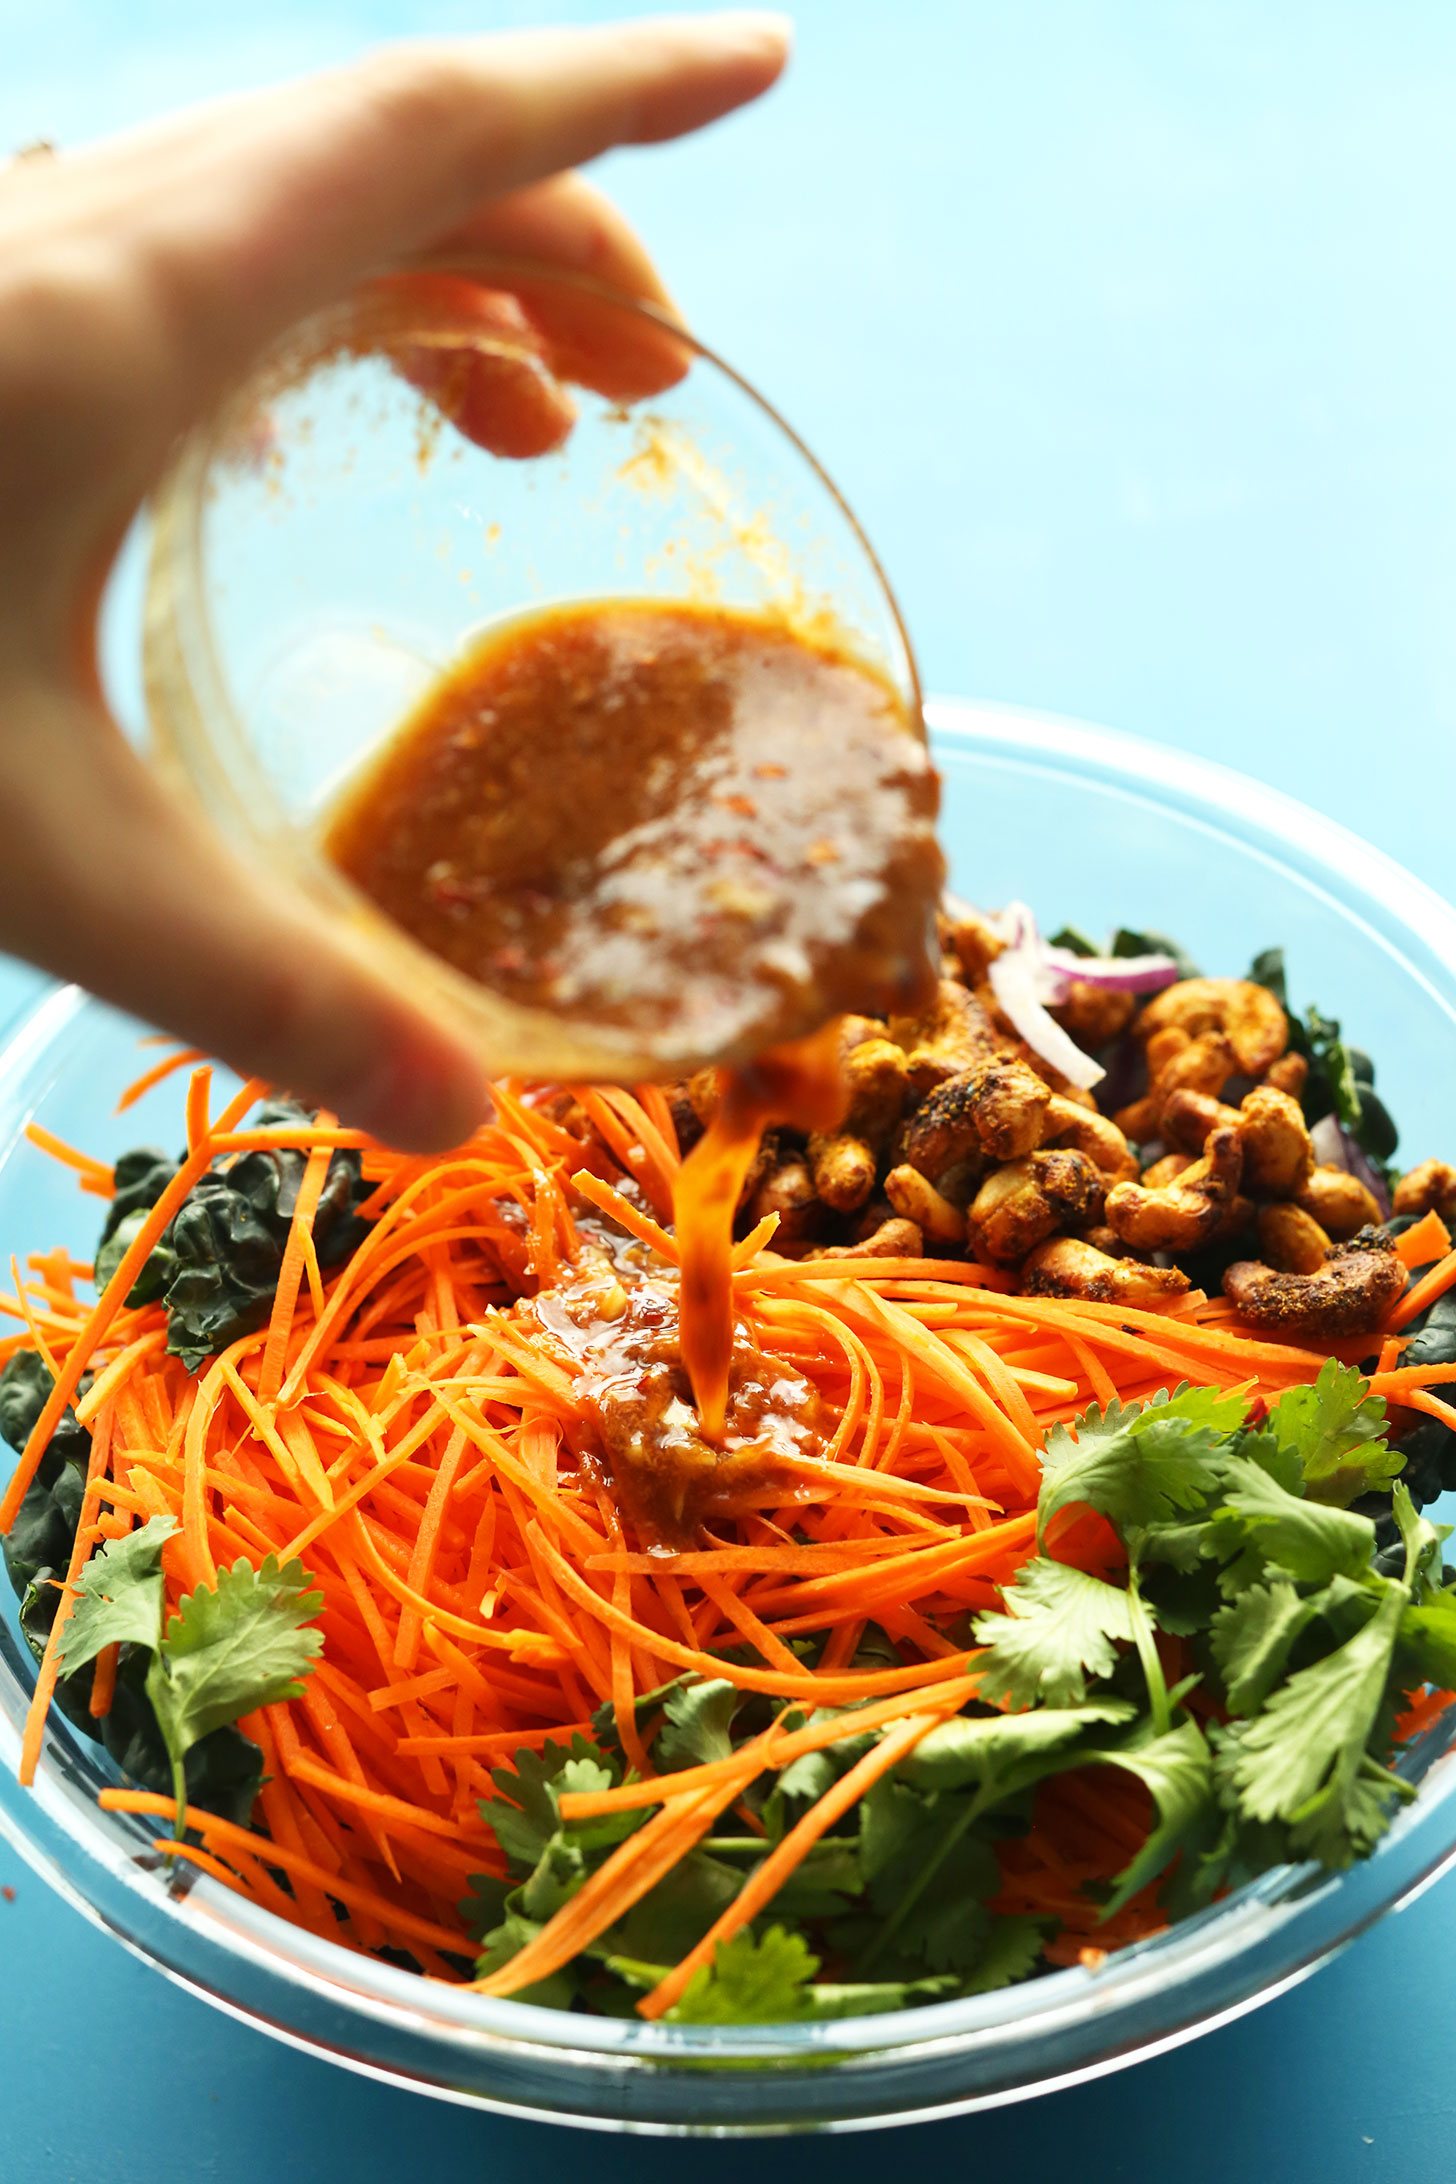 Pouring dressing onto our Easy Thai Carrot Salad with Curried Cashews